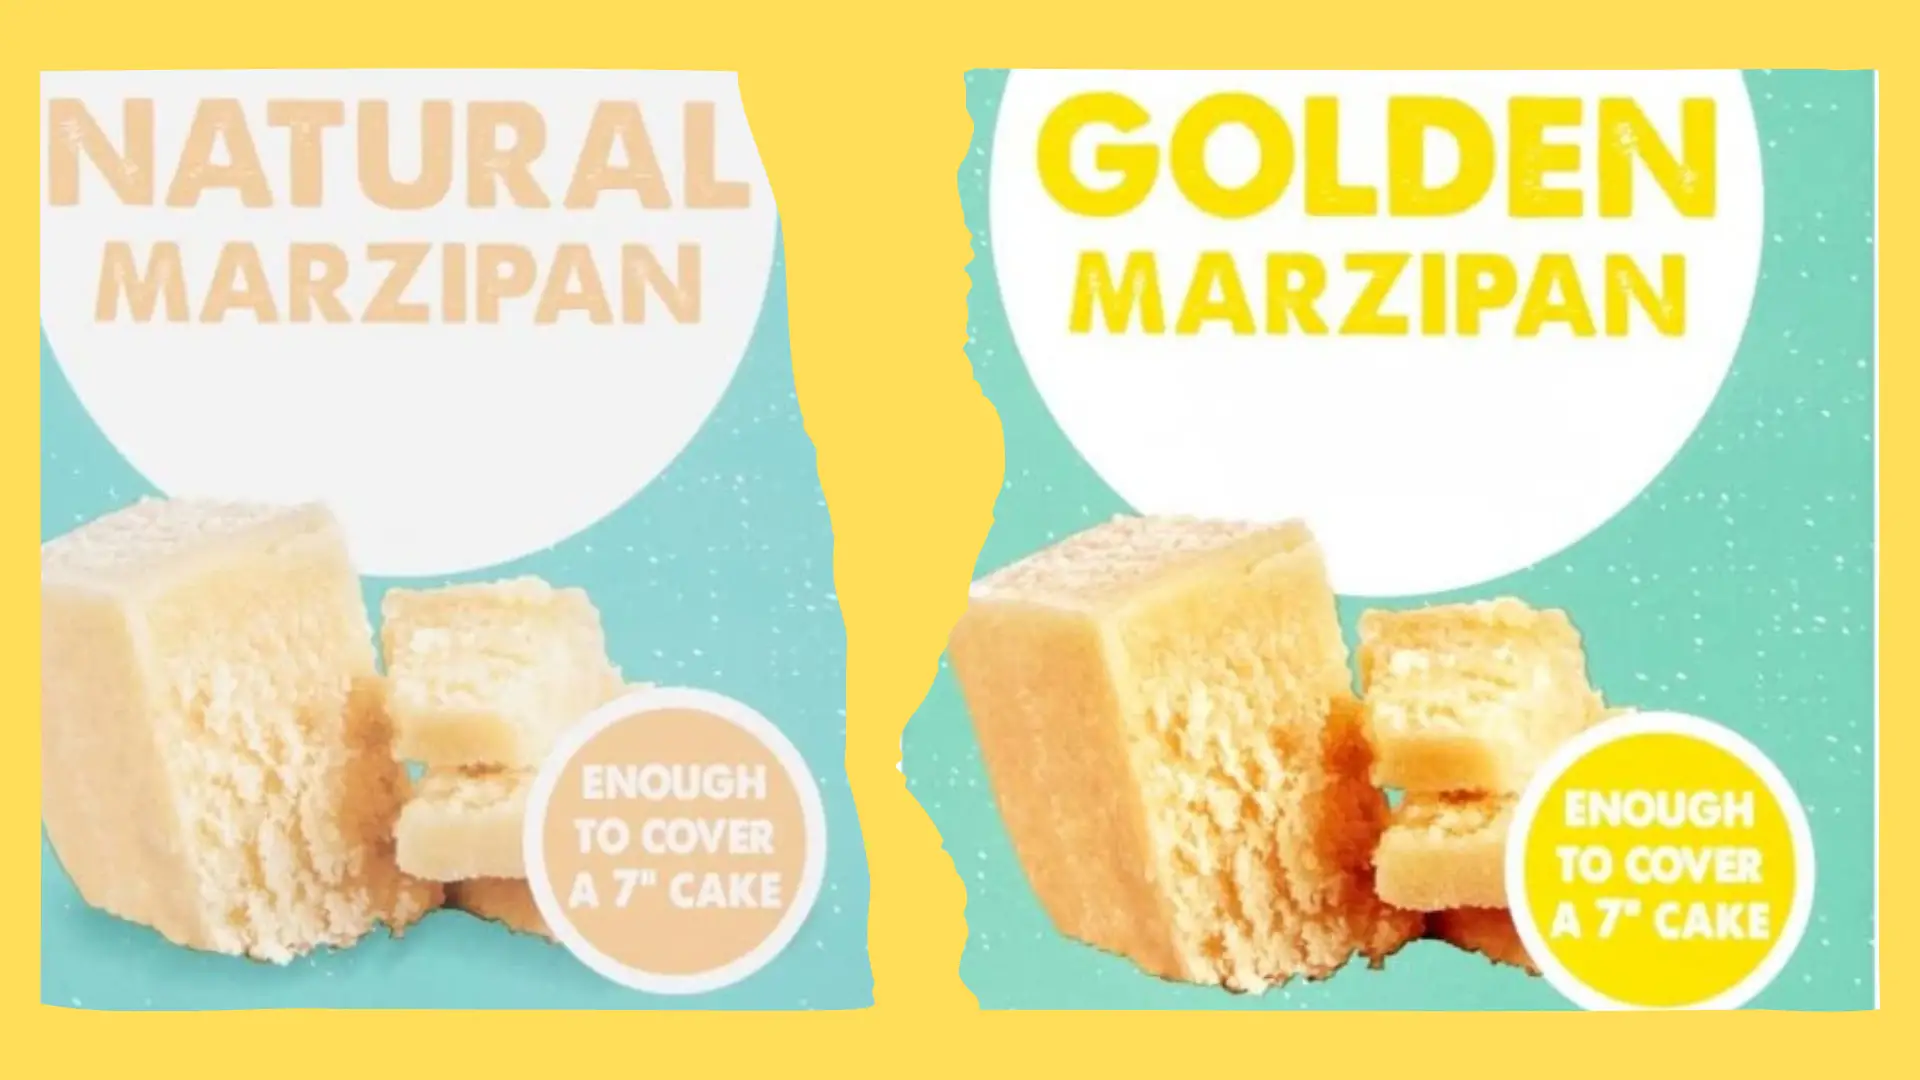 What’s the Difference Between Natural Marzipan and Golden Marzipan?